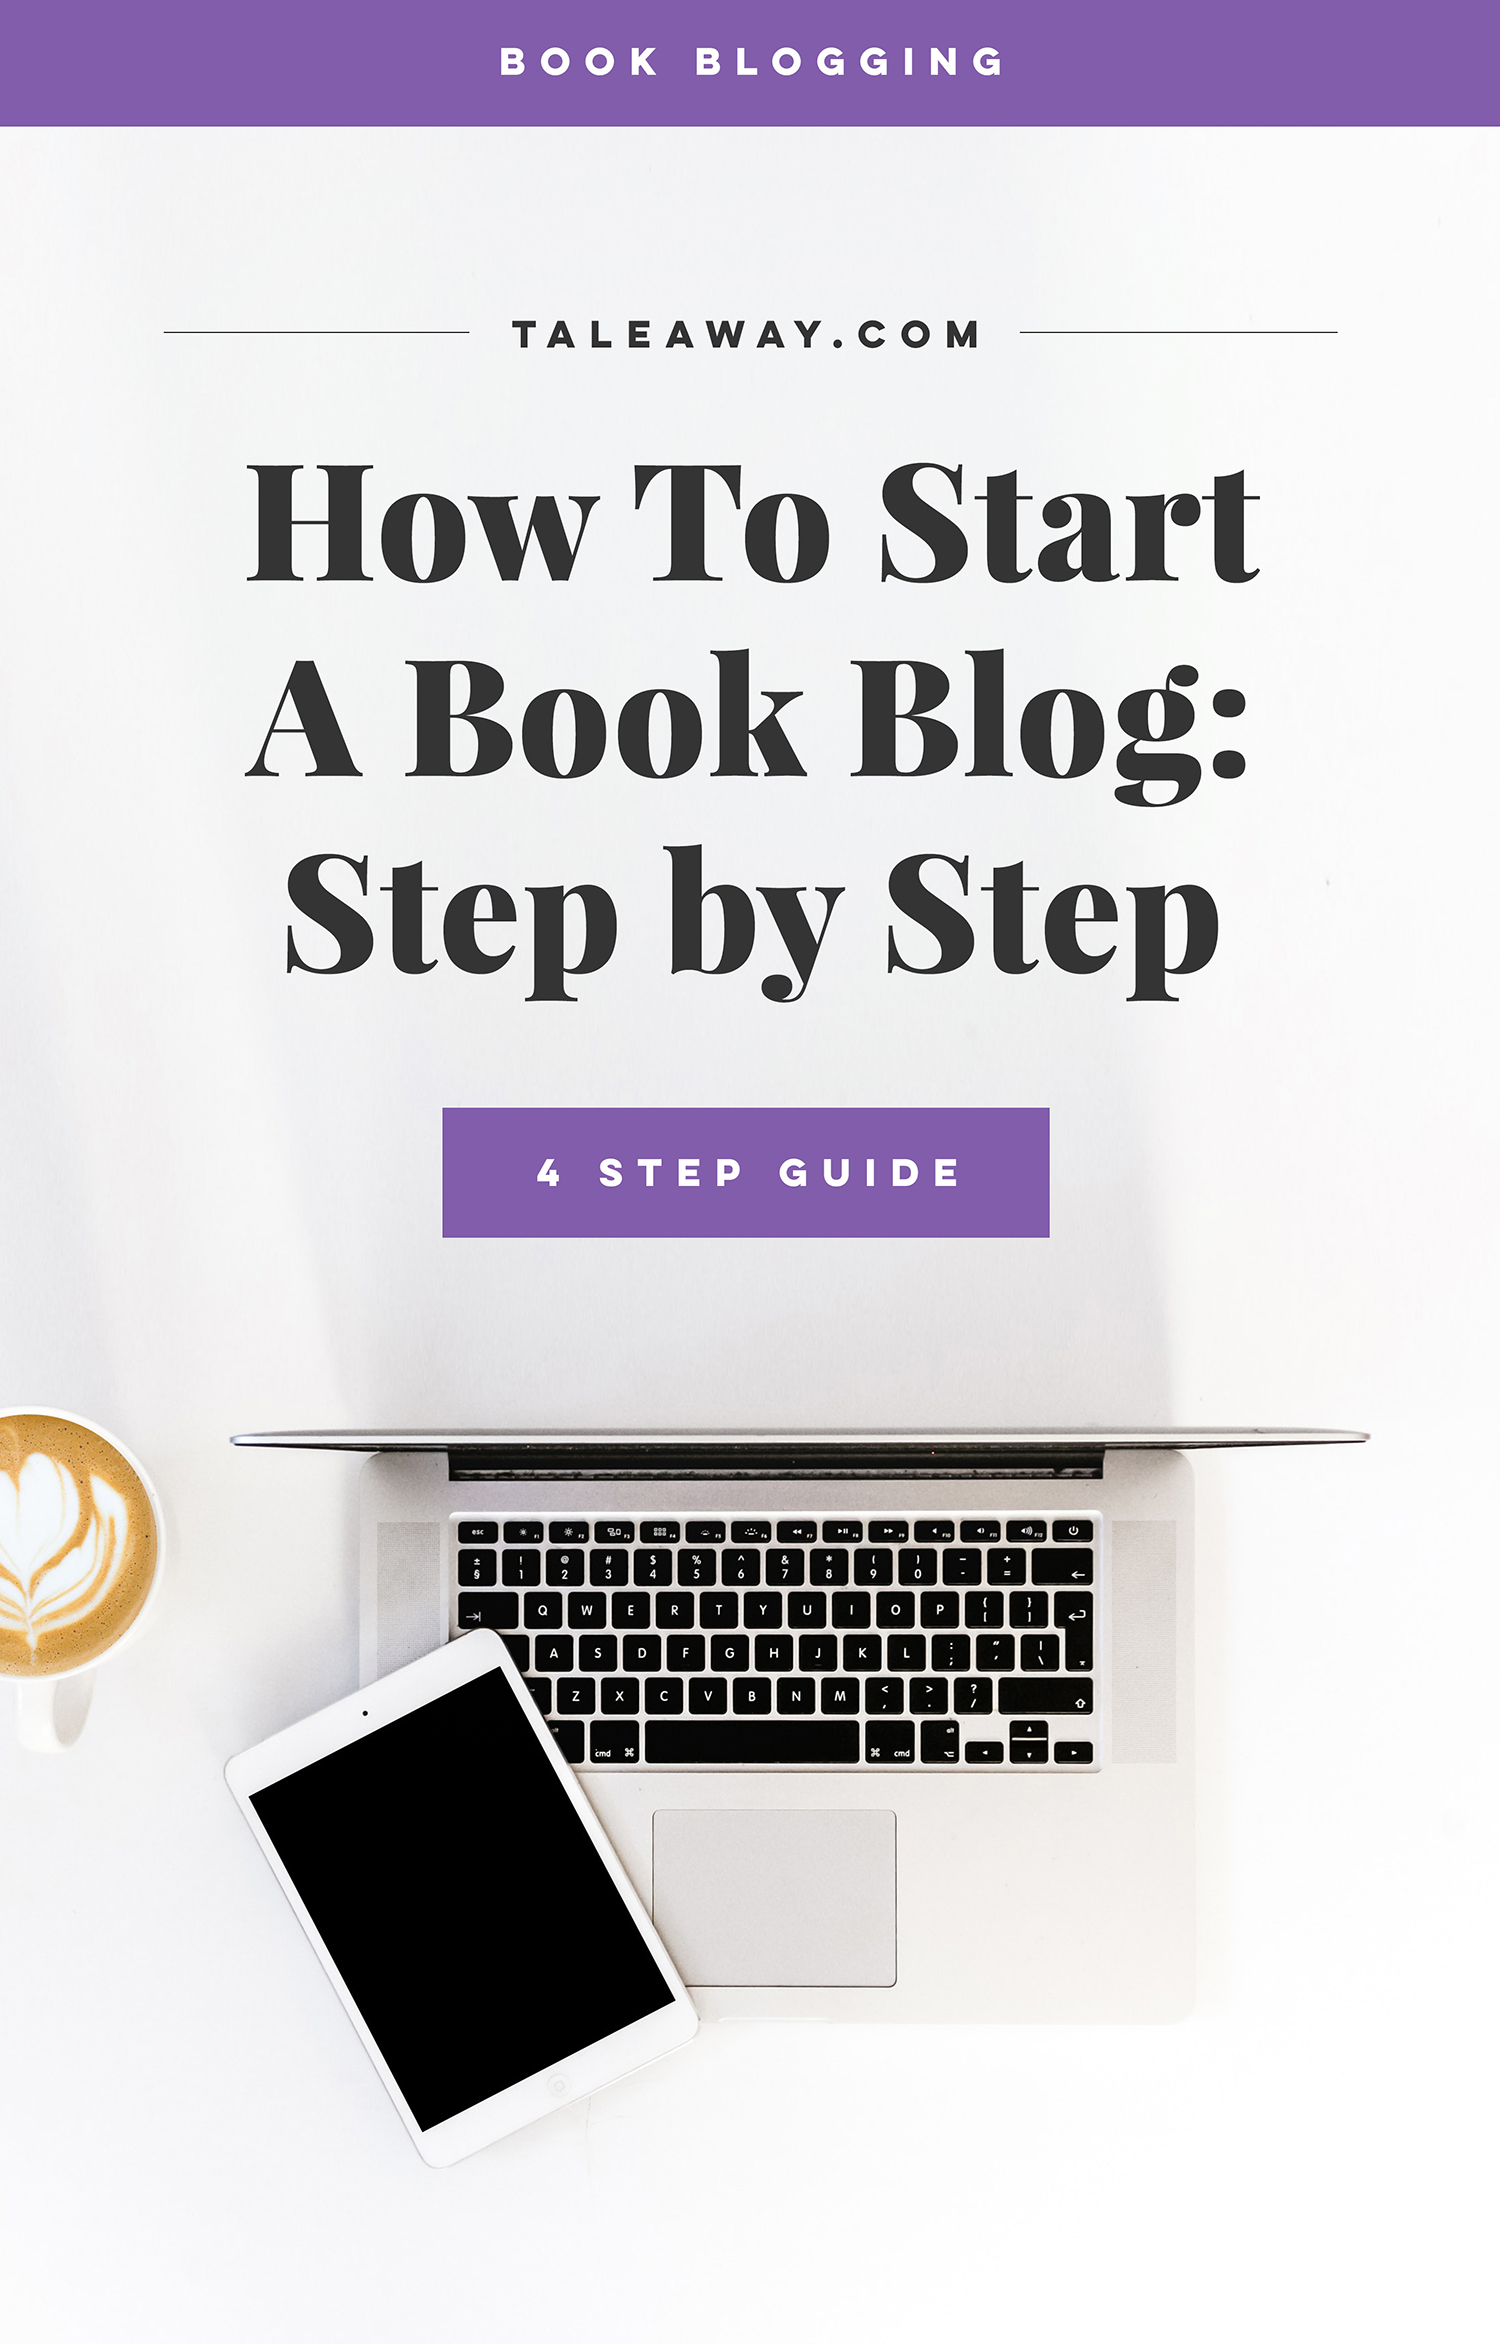 How To Start A Book Blog: In 4 Simple Steps - book blog, book blogging, book blogging for beginners, start a book blog, make a book blog, steps to start a book blog, how to write a book blog, how to get a book blog, book blogs wordpress, wordpress blog, how do I start my book blog, how do you start a reading blog, reading blog, start a reading blog, how to become a book blogger, book blog ideas, domain search, domain name, cheap domain, how to start a blog, how to create a blog, how to make a blog, blog step by step, how to blog, how to set up a blog, start your own blog, how to start a website